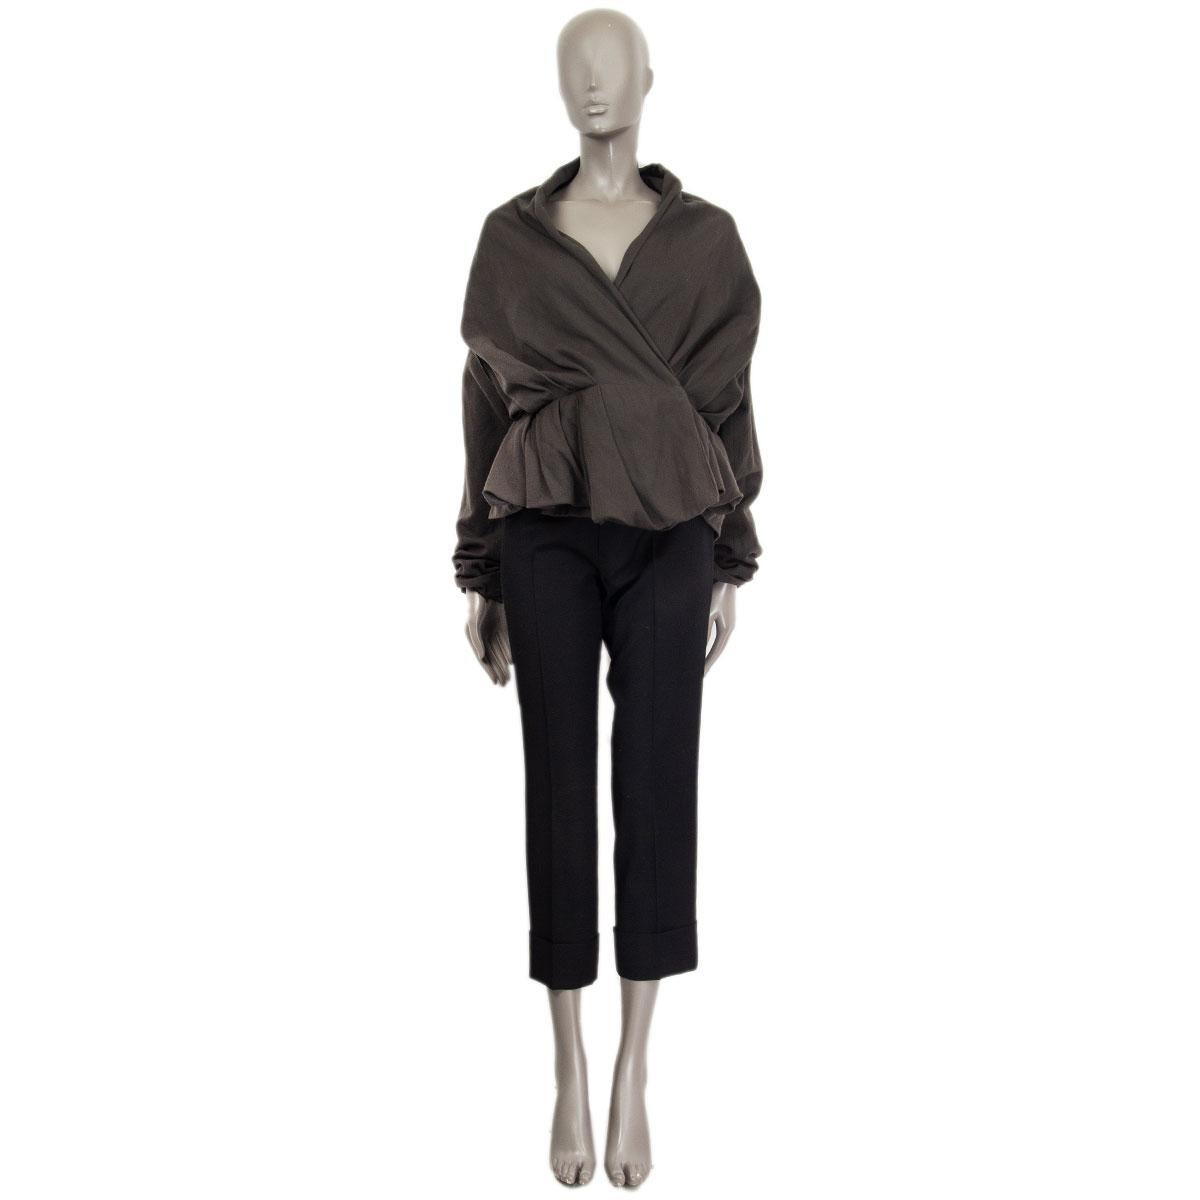 100% authentic Lanvin peplum asymmetric blazer in gray wool (96%) and metal (4%). With thin gray shawl collar and two belt loops (belt missing). Closes with a hidden button and a concealed hook on the front. Sleeves are lined in gray silk. Has been